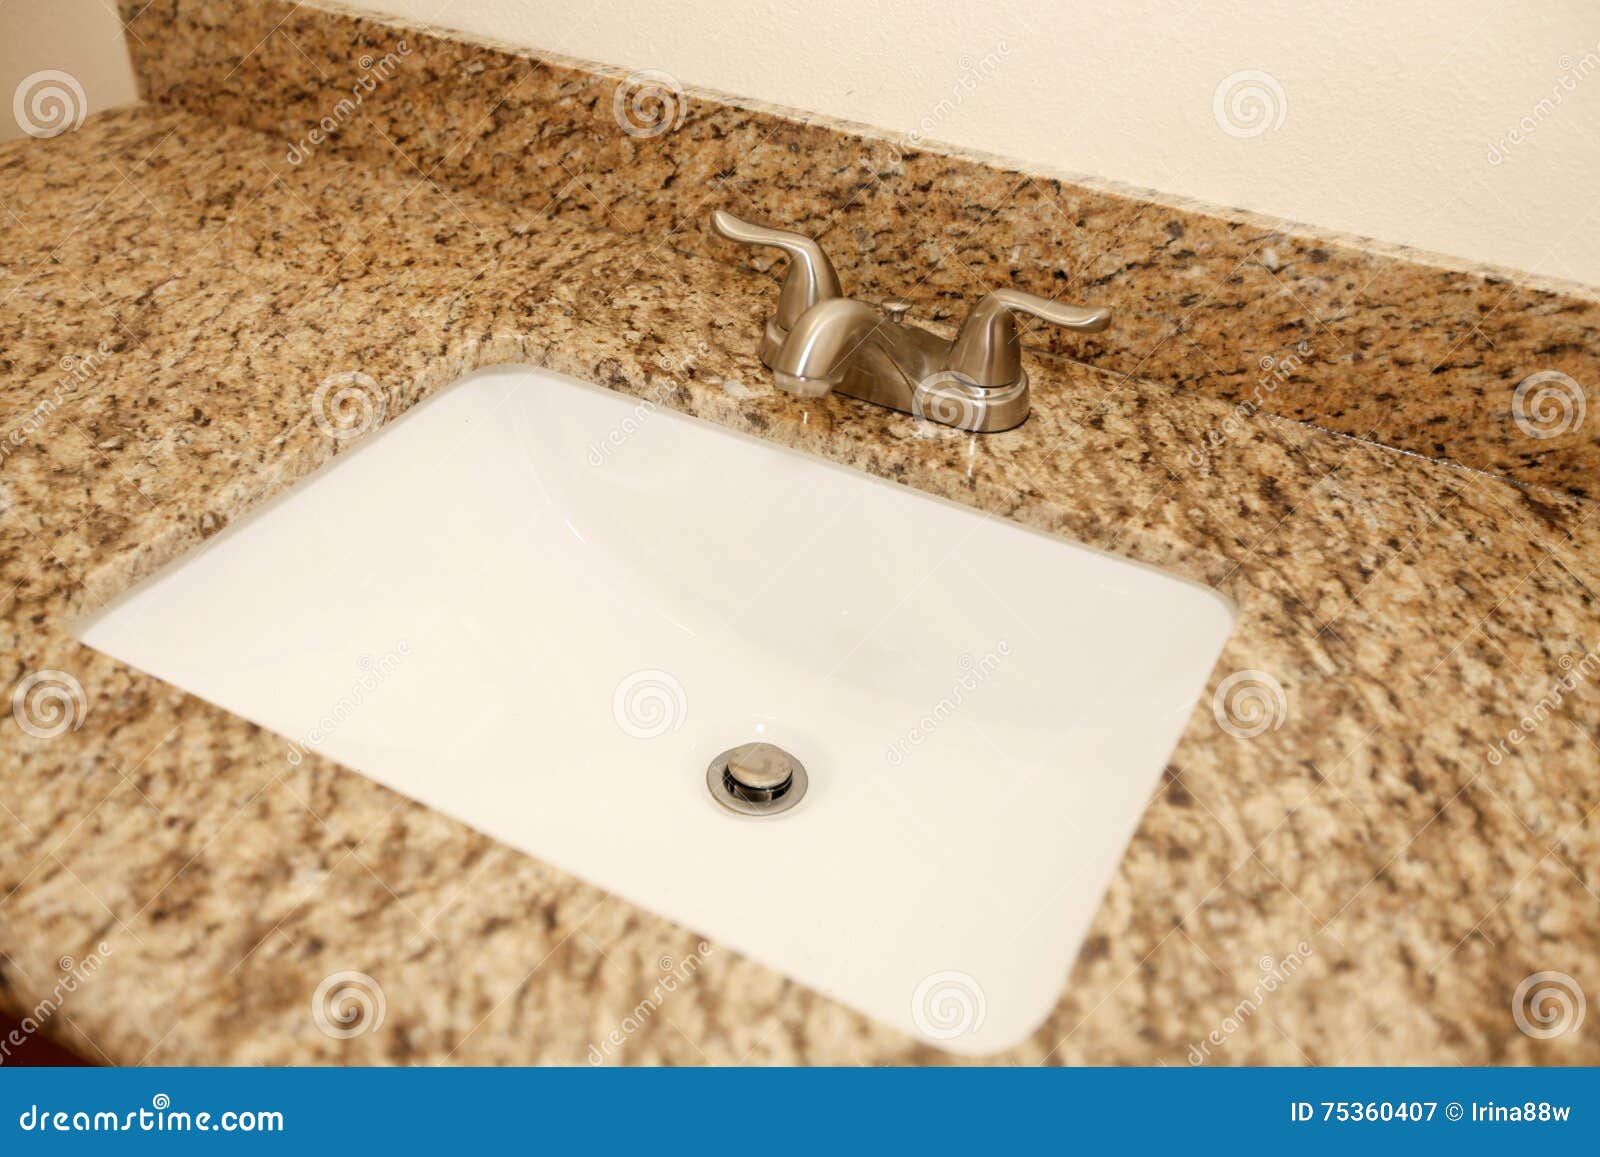 Close Up Of The Bathroom Sink And Granite Counter Top Stock Image